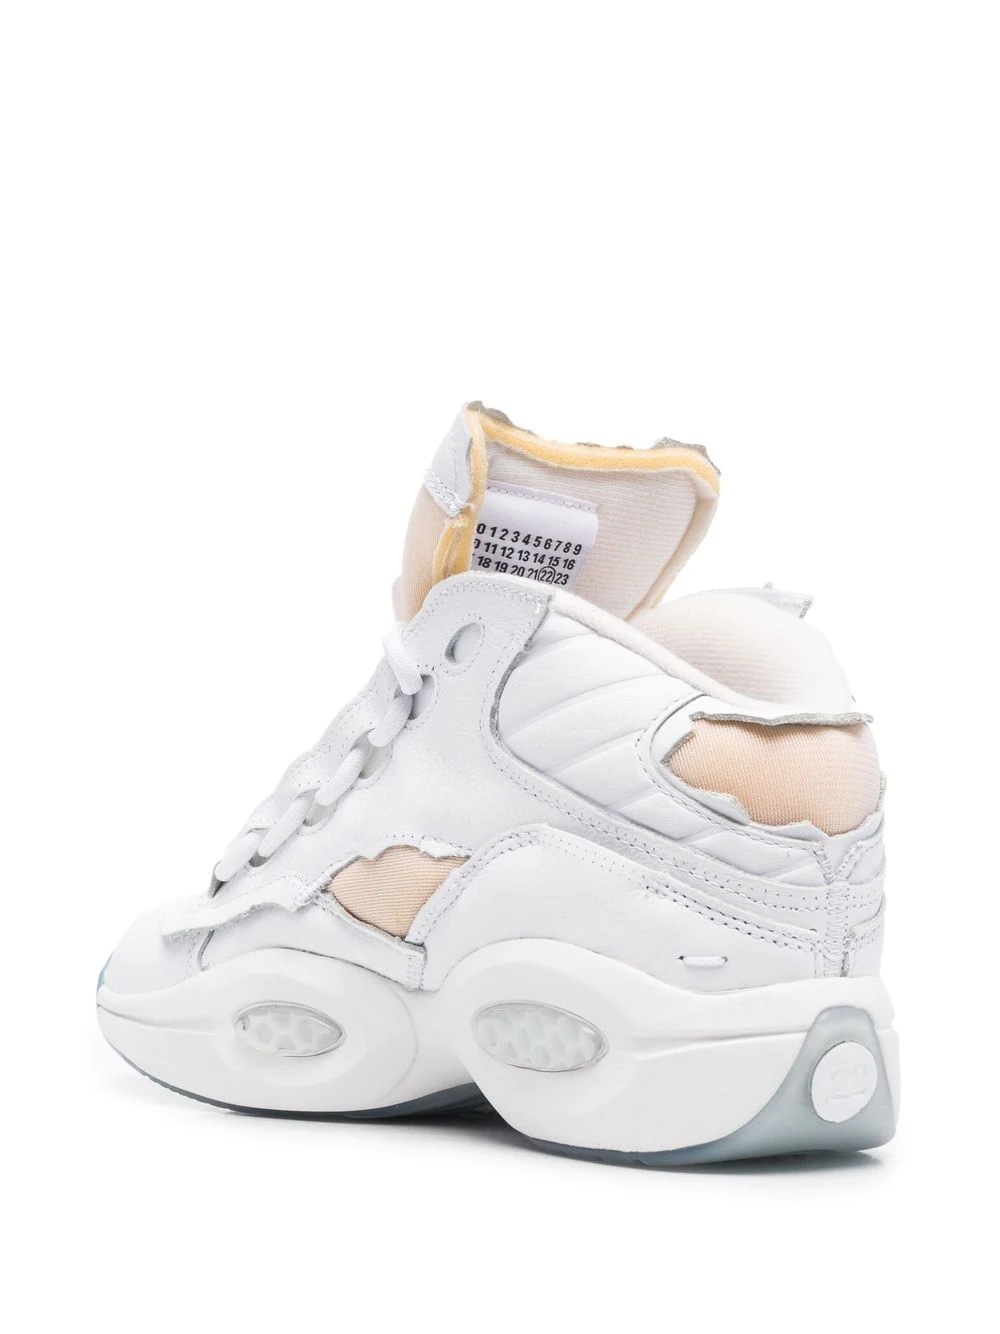 x Maison Margiela Question Mid Memory Of sneakers - 3